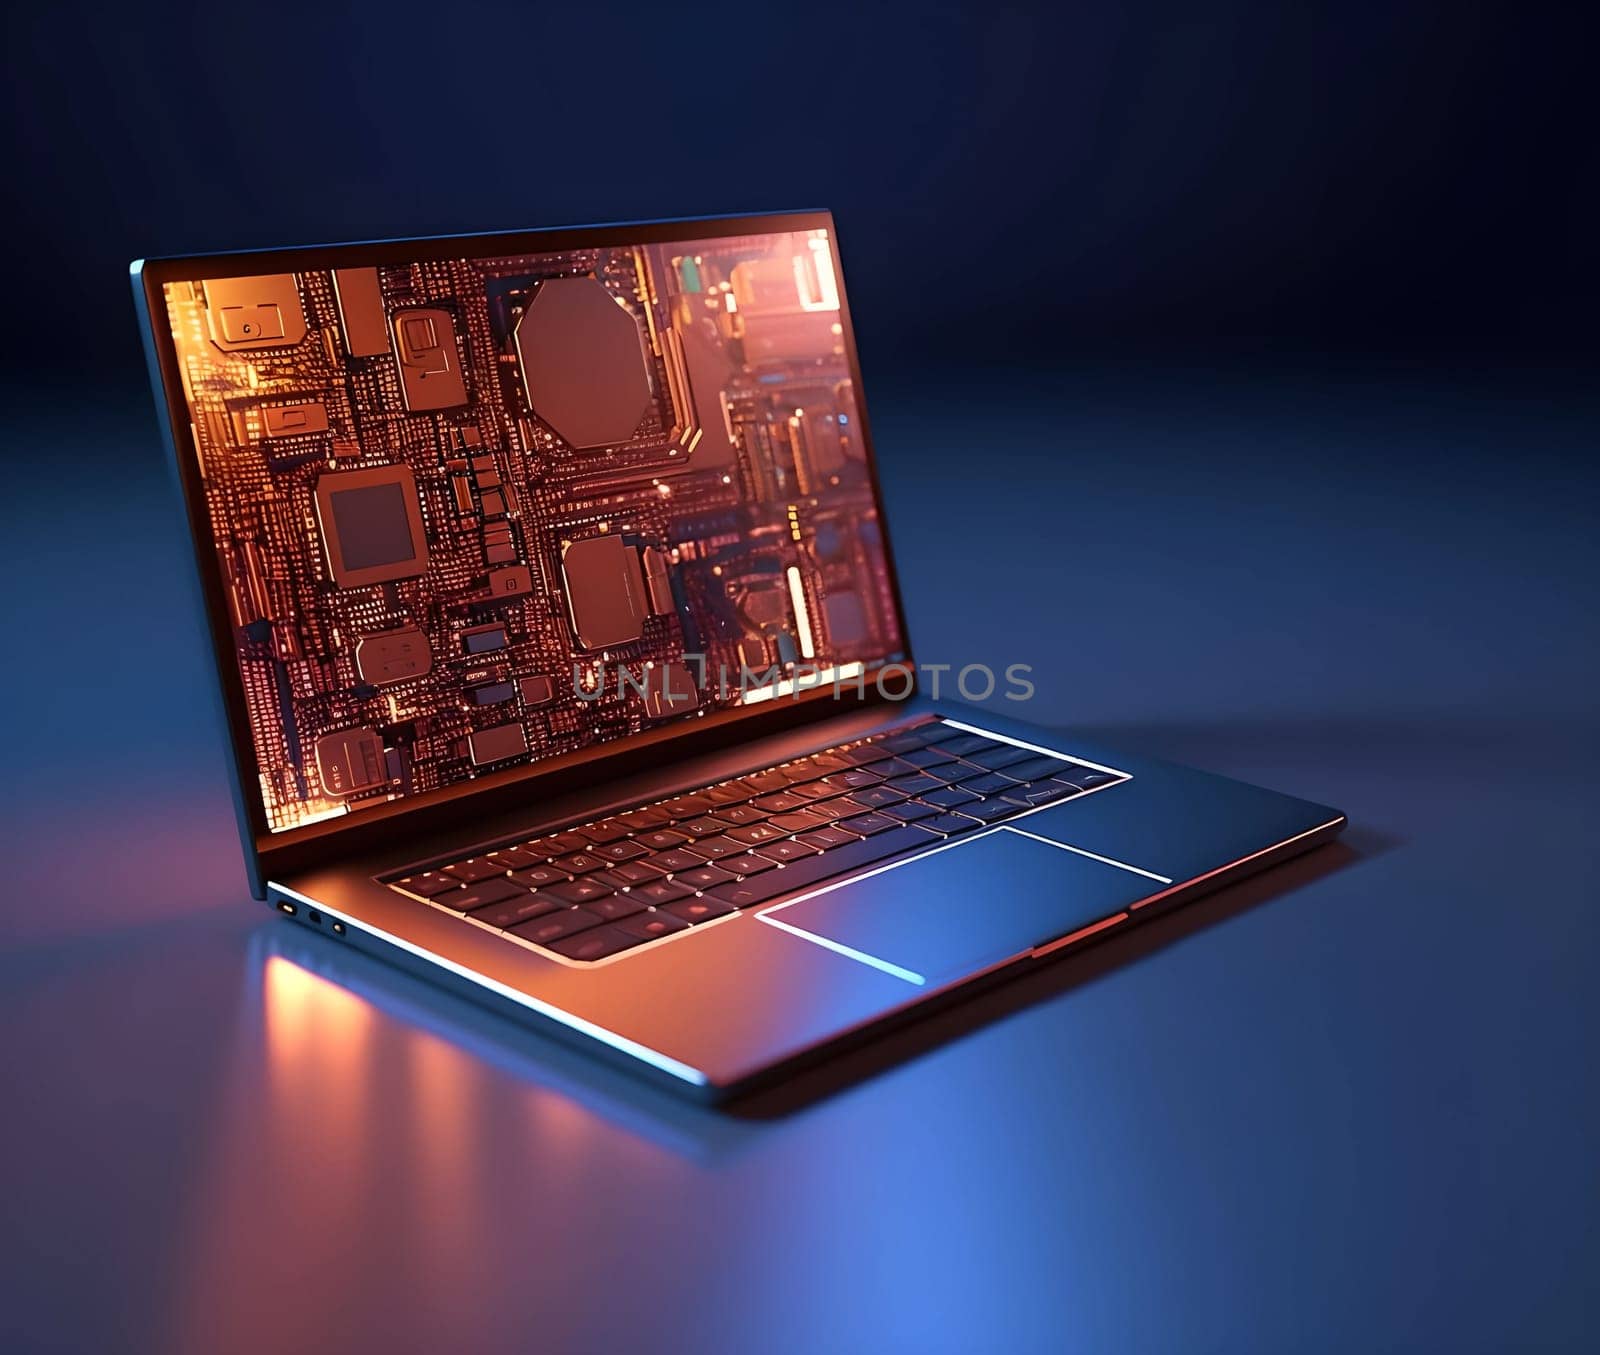 A modern laptop. There is a bright beautiful picture on the screen